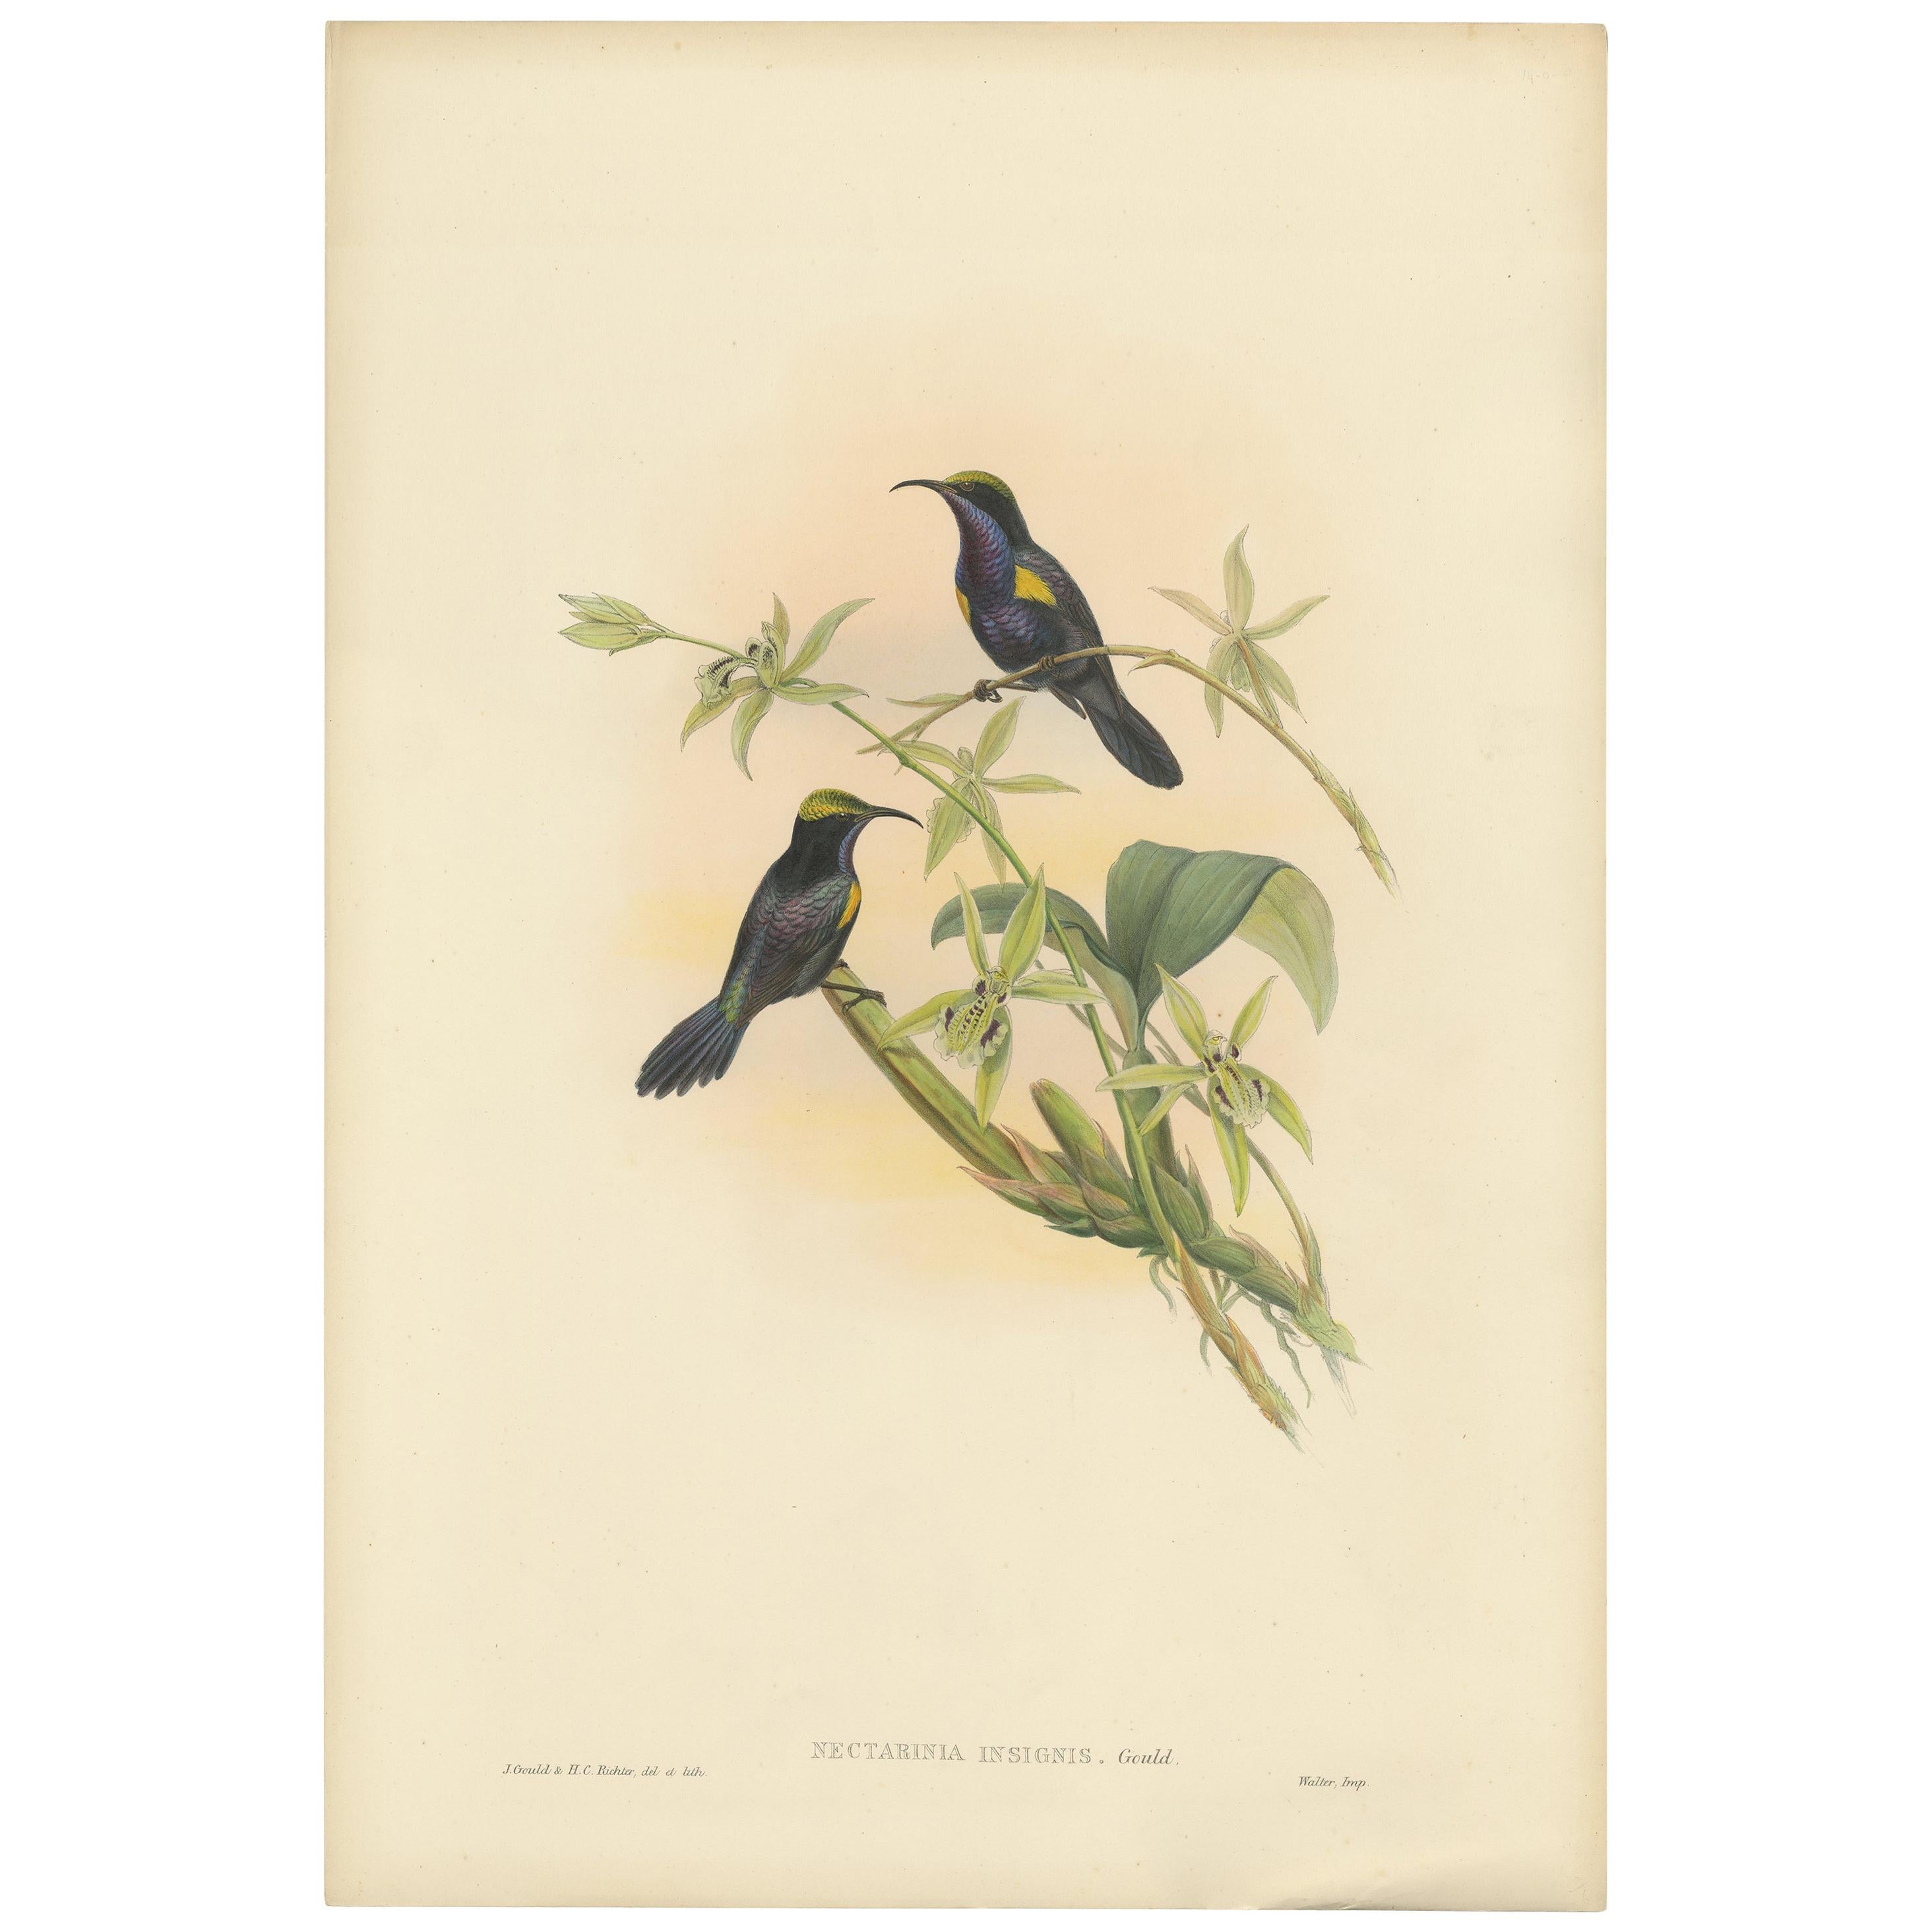 Antique Bird Print of the Copper-Throated Sunbird by Gould 'circa 1850'